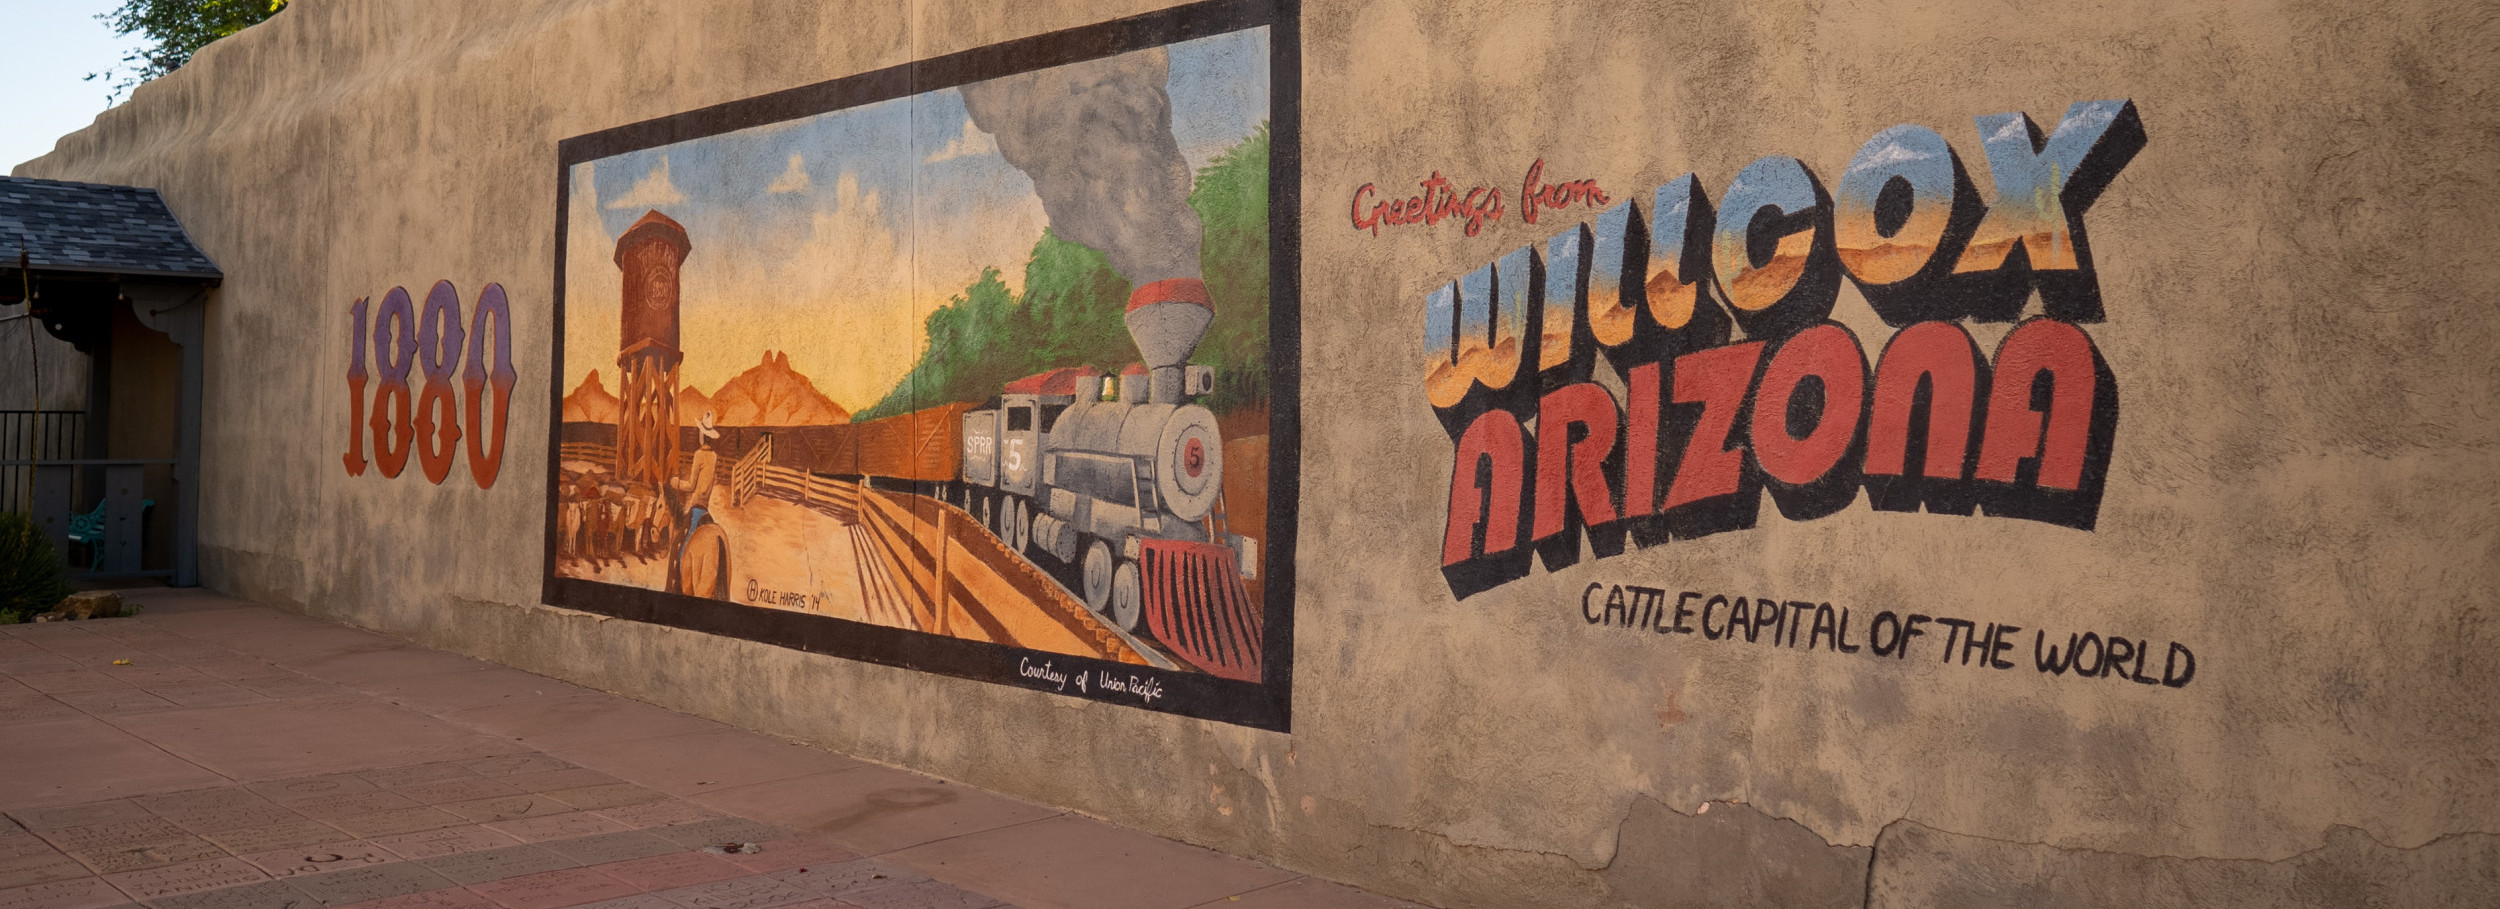 wall mural that reads "greetings from willcox arizona, cattle capital of the world"